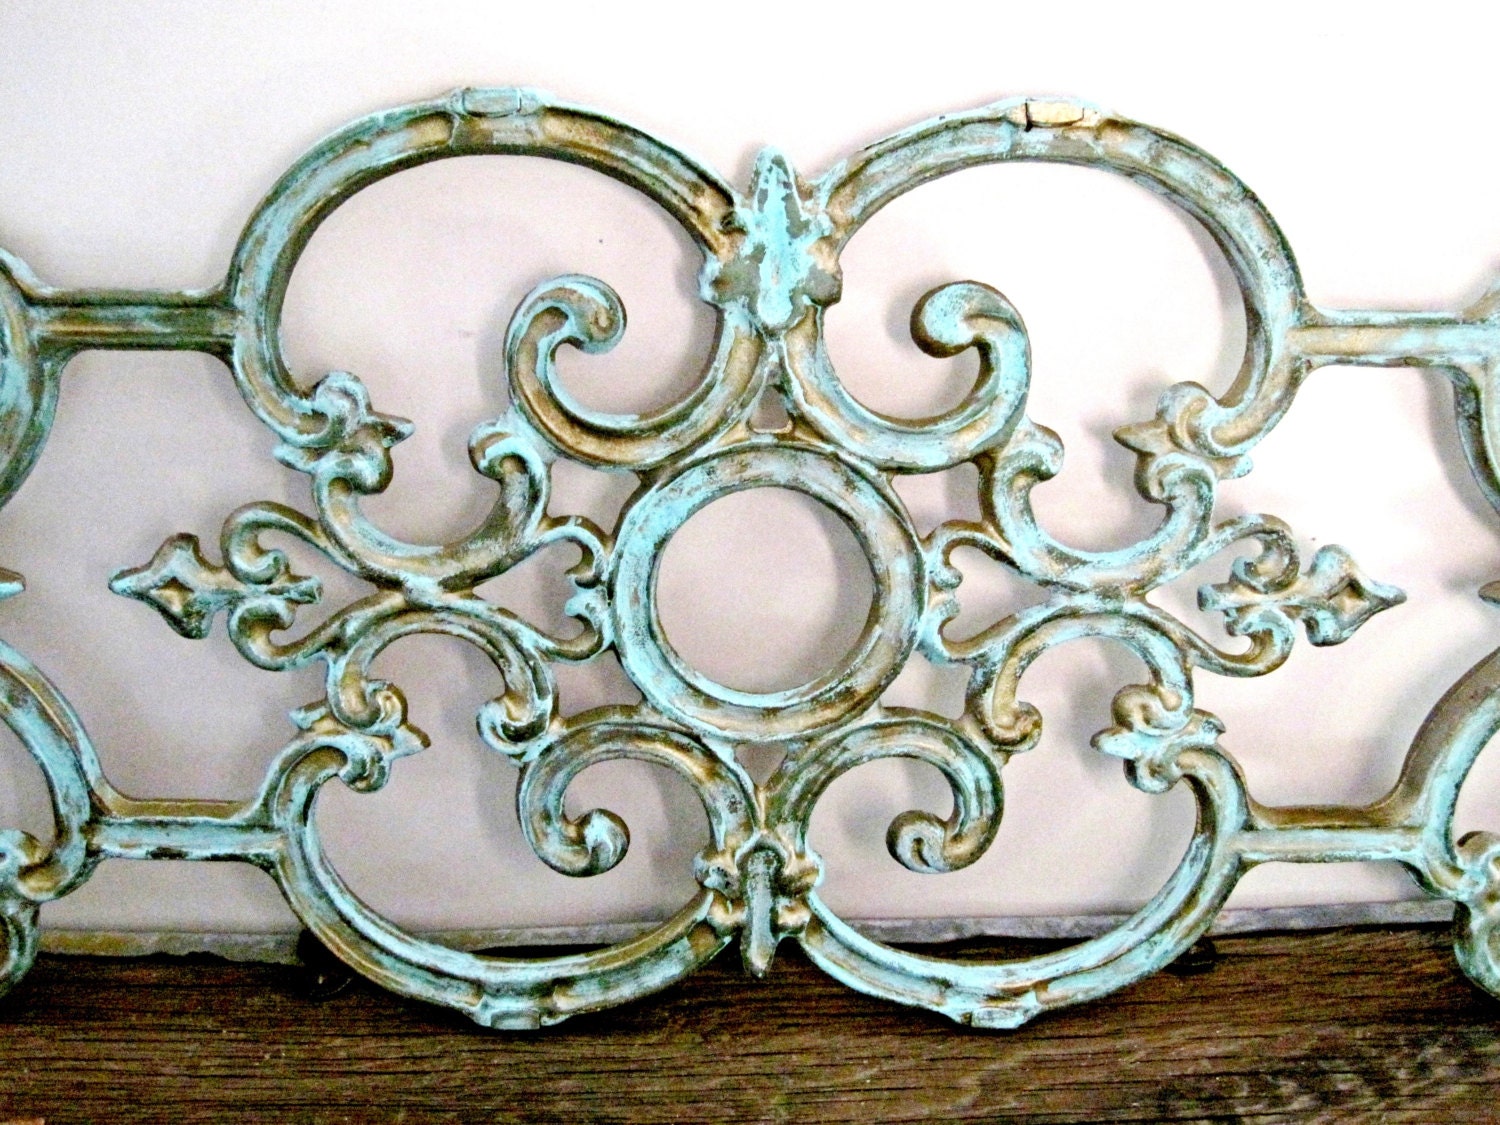 Large Wrought Iron Gate Architectural Salvage Wall Decor